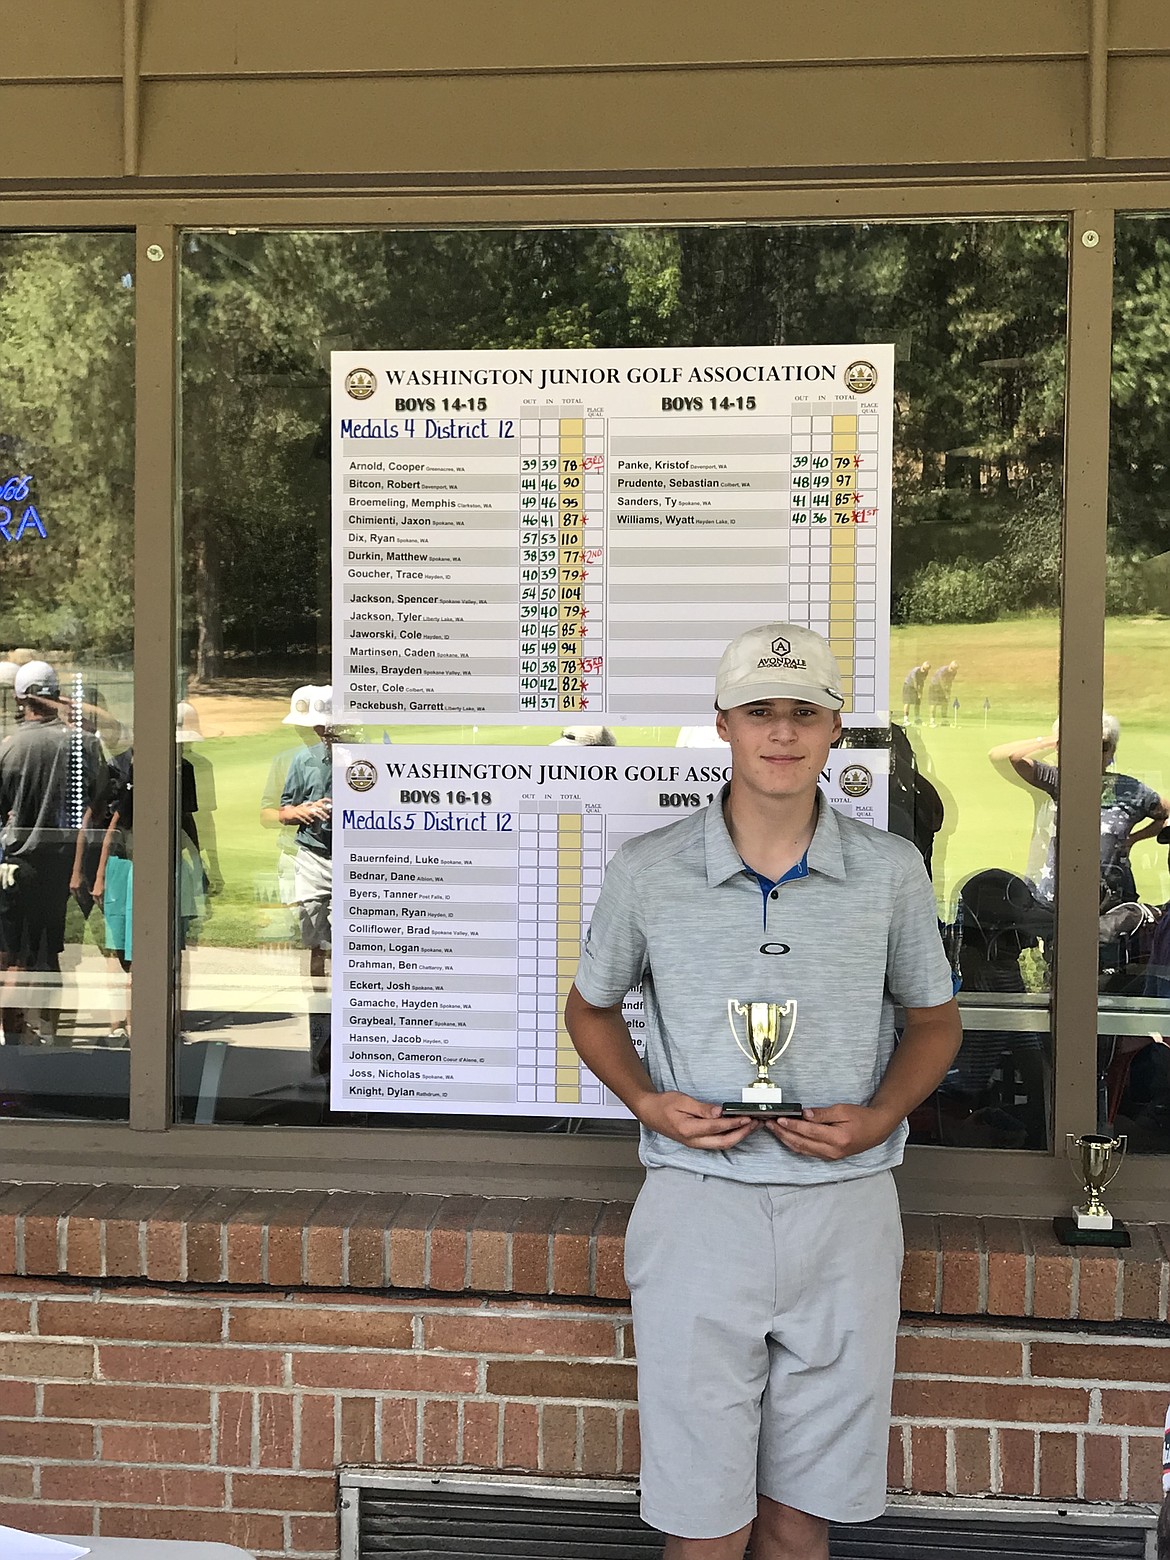 Wyatt Williams, 15, from Hayden Lake shot 76 from the blue tees to win his age group at a Washington Junior Golf Association tournament last week at Esmeralda Golf Course in Spokane.

Courtesy photo